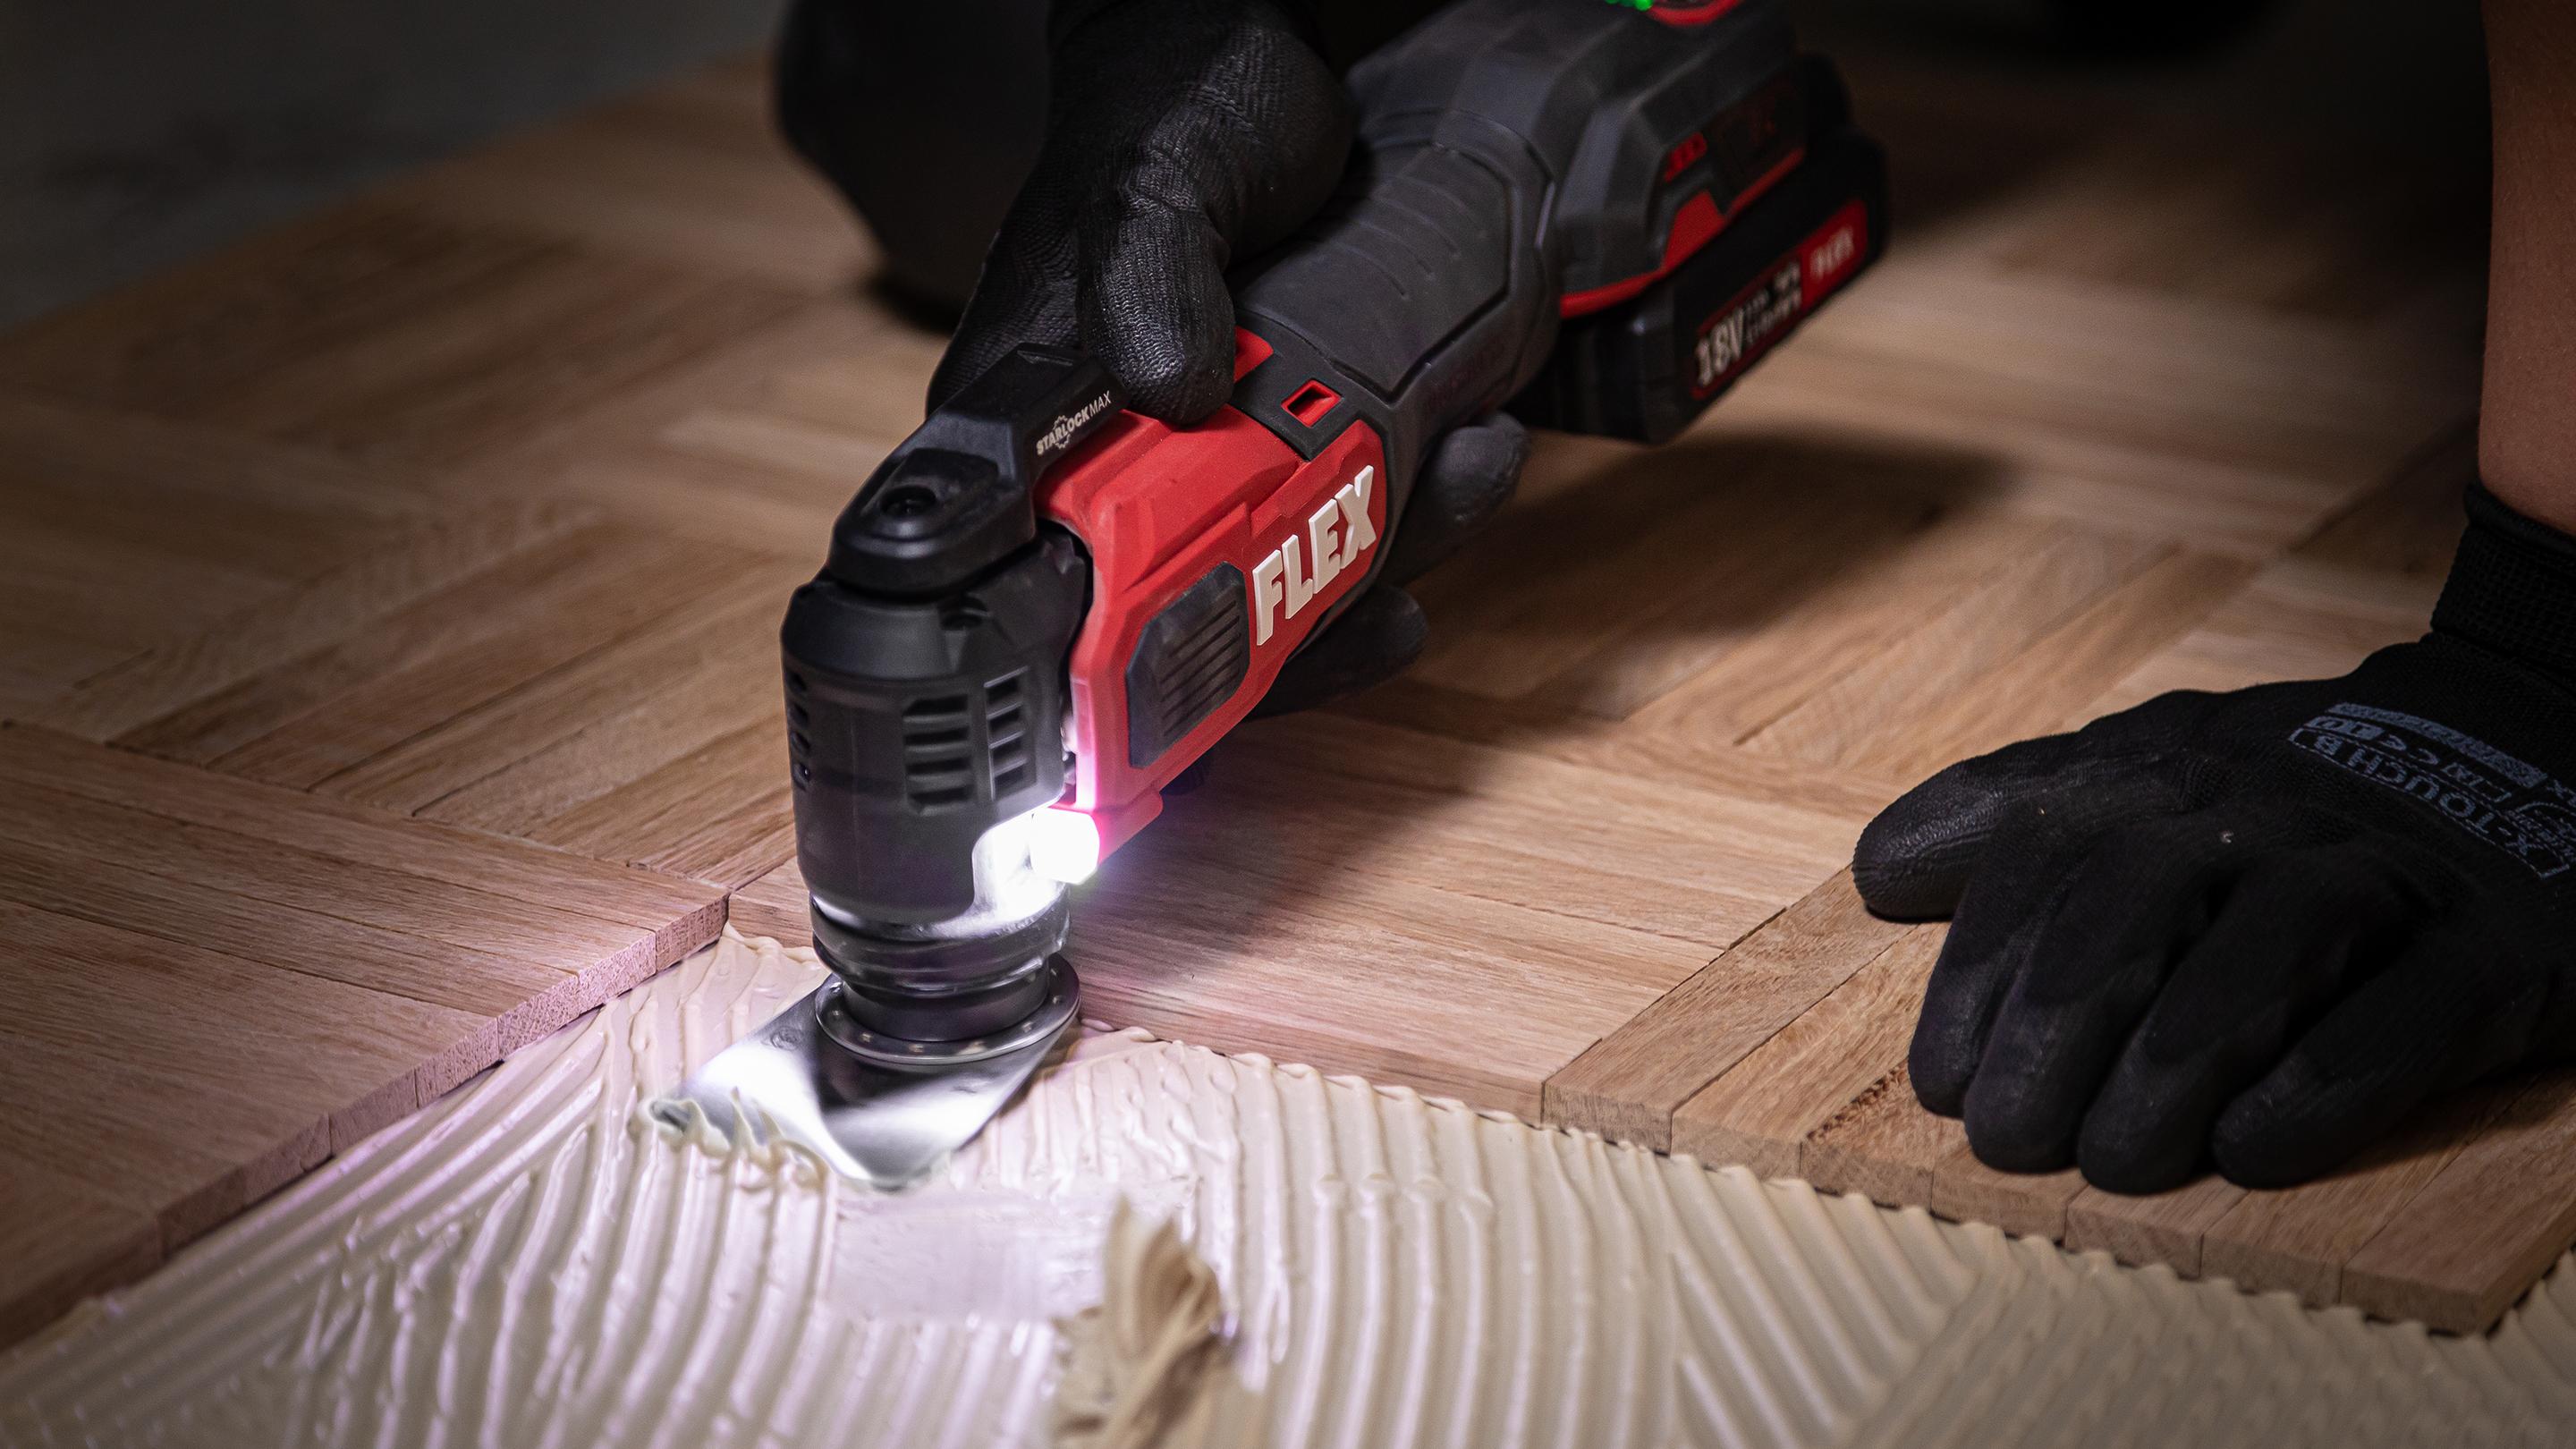 Remove parquet adhesive with FLEX battery-powered multitool